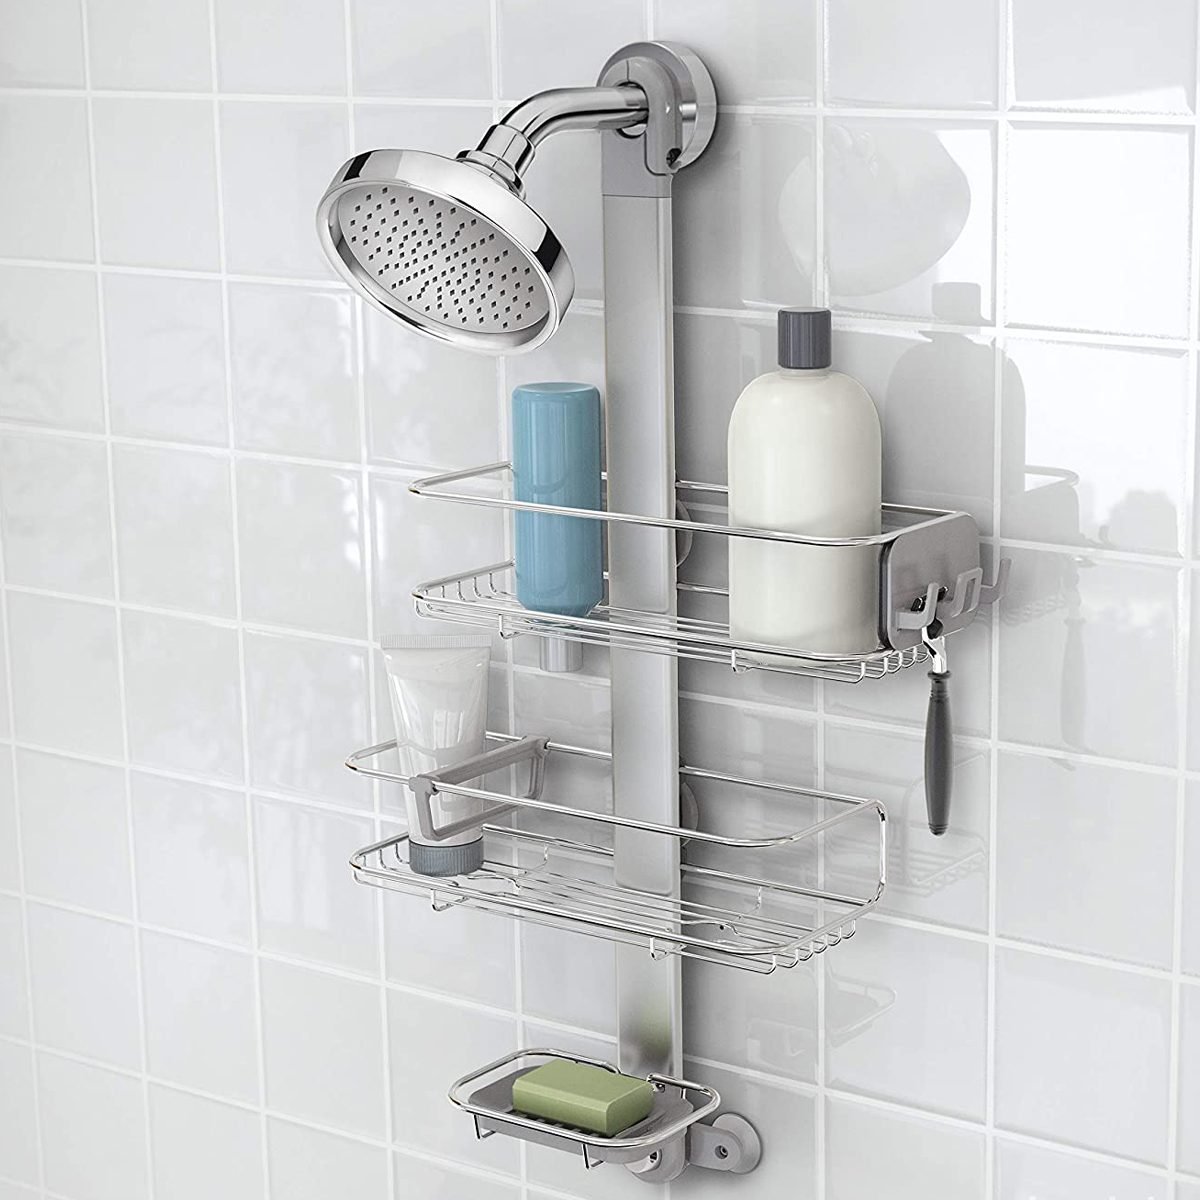 Do it yourself shower caddy. Materials: basket size and color your choice.  3M command damage free hang…